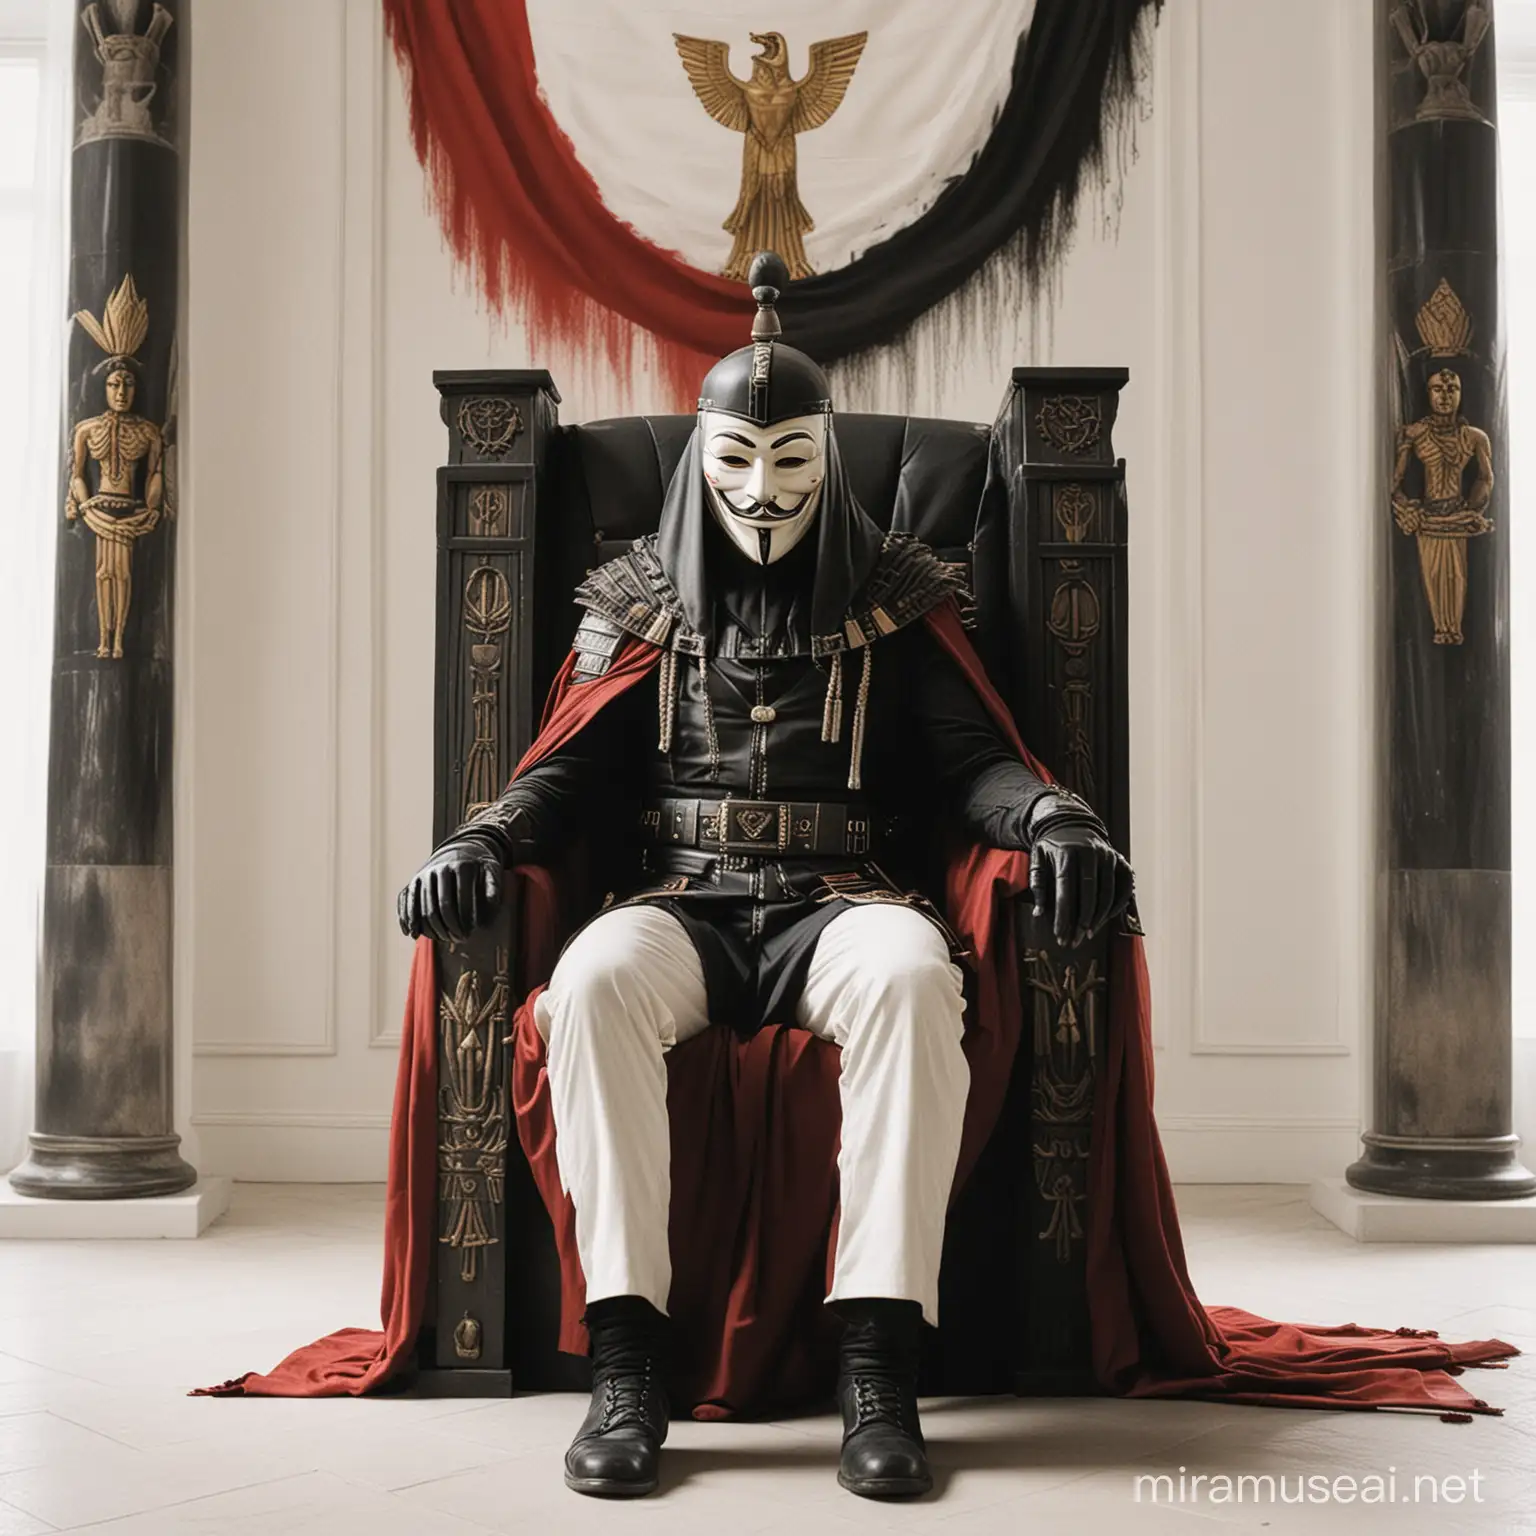 v For Vendetta is sitting in a white room on a white throne, showing only half of his body. I want him wearing the original v For Vendetta mask And give him a formal Behind him is a picture of the Egyptian flag 